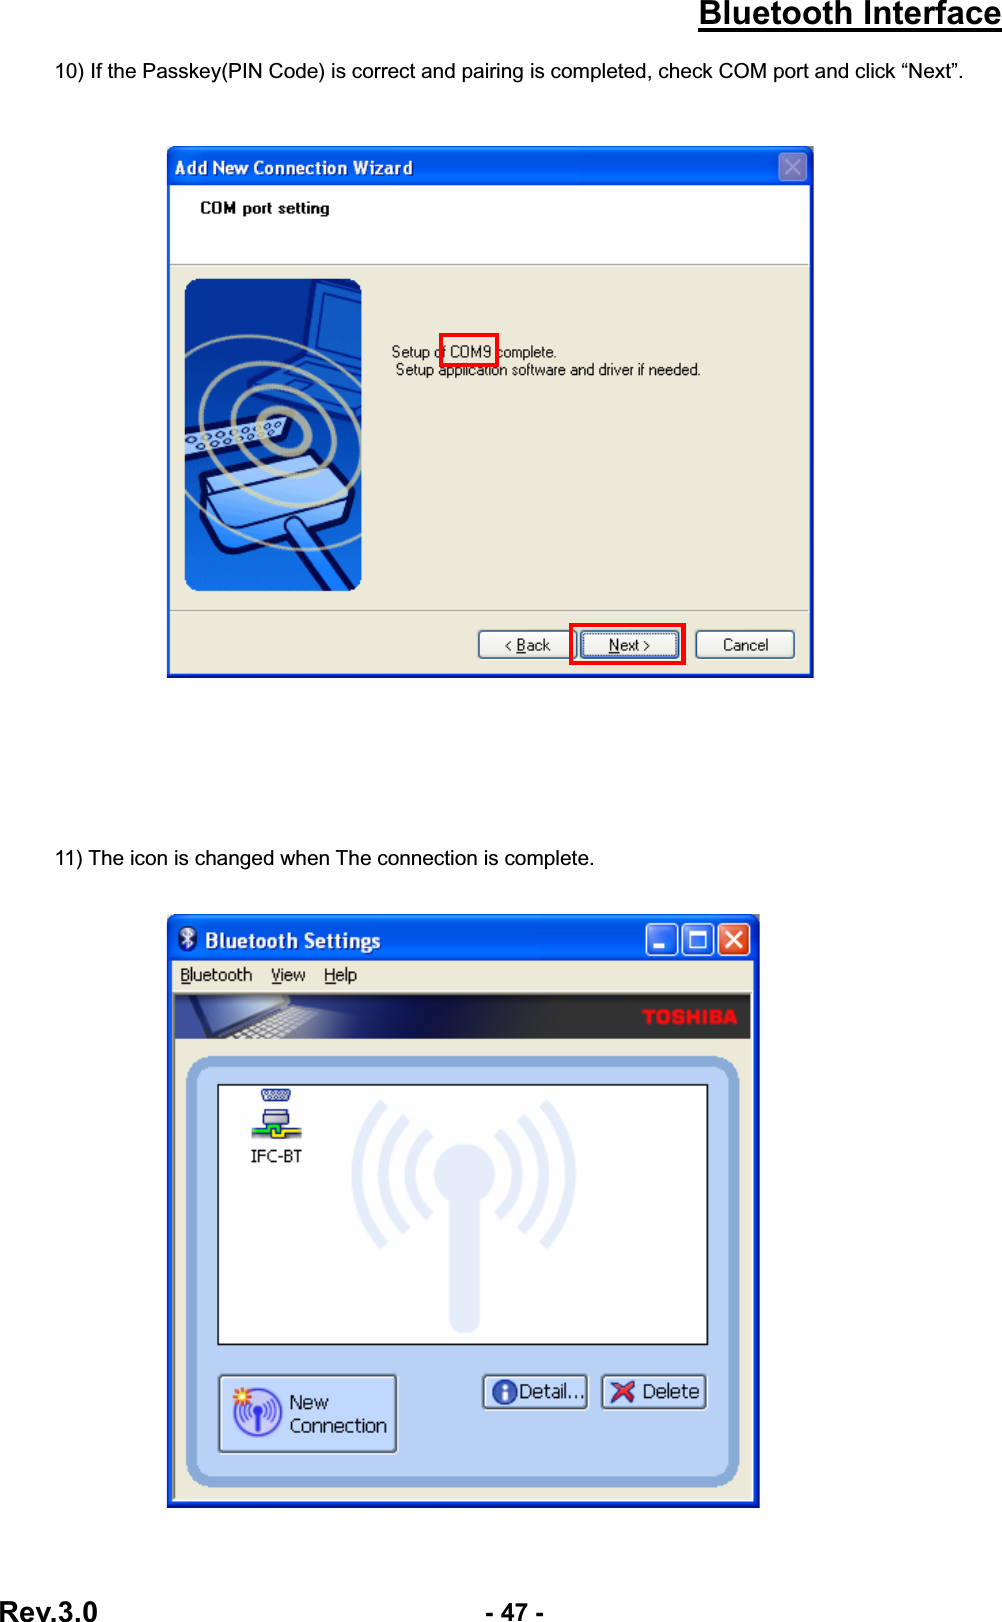 Bluetooth InterfaceRev.3.0  - 47 -10) If the Passkey(PIN Code) is correct and pairing is completed, check COM port and click “Next”. 11) The icon is changed when The connection is complete.